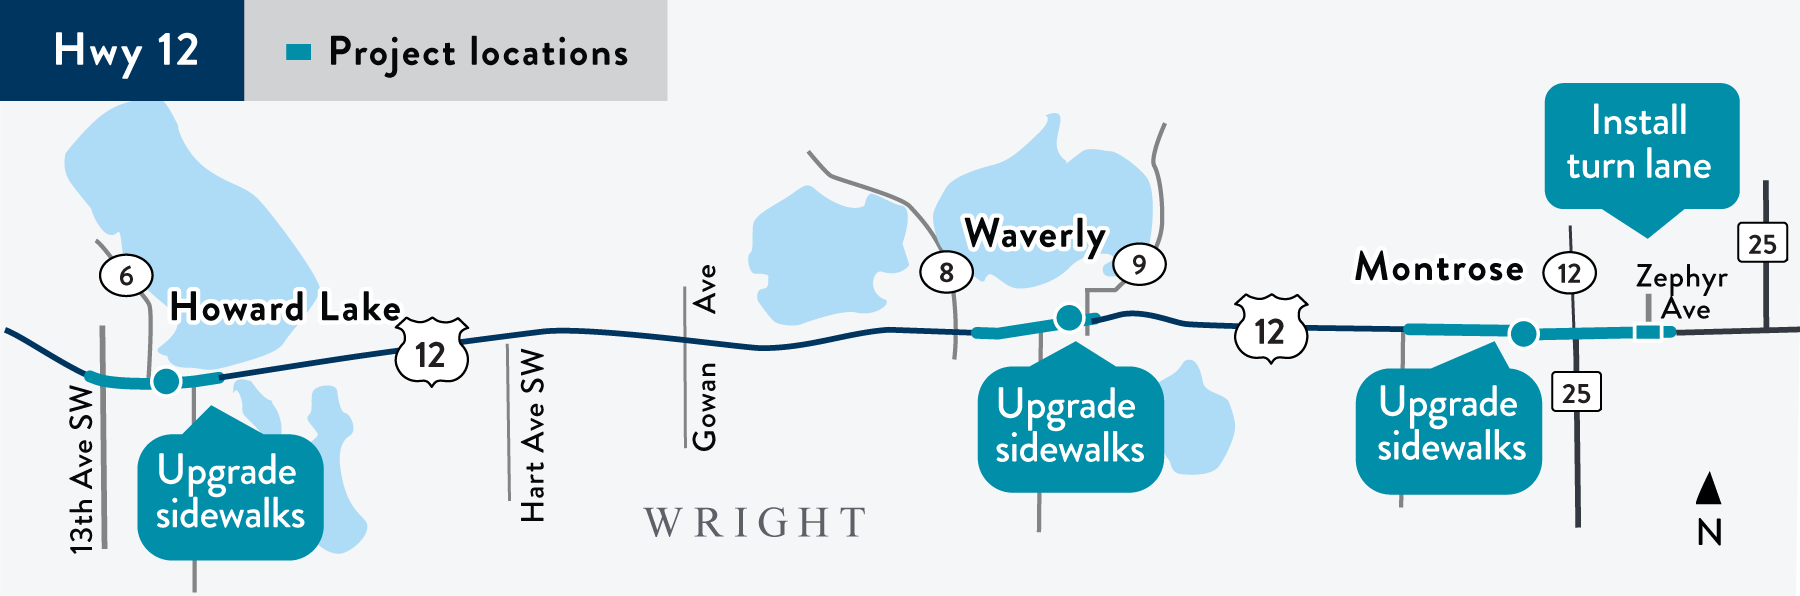 Project location map on Hwy 12 between Howard Lake and Montrose, includes Waverly